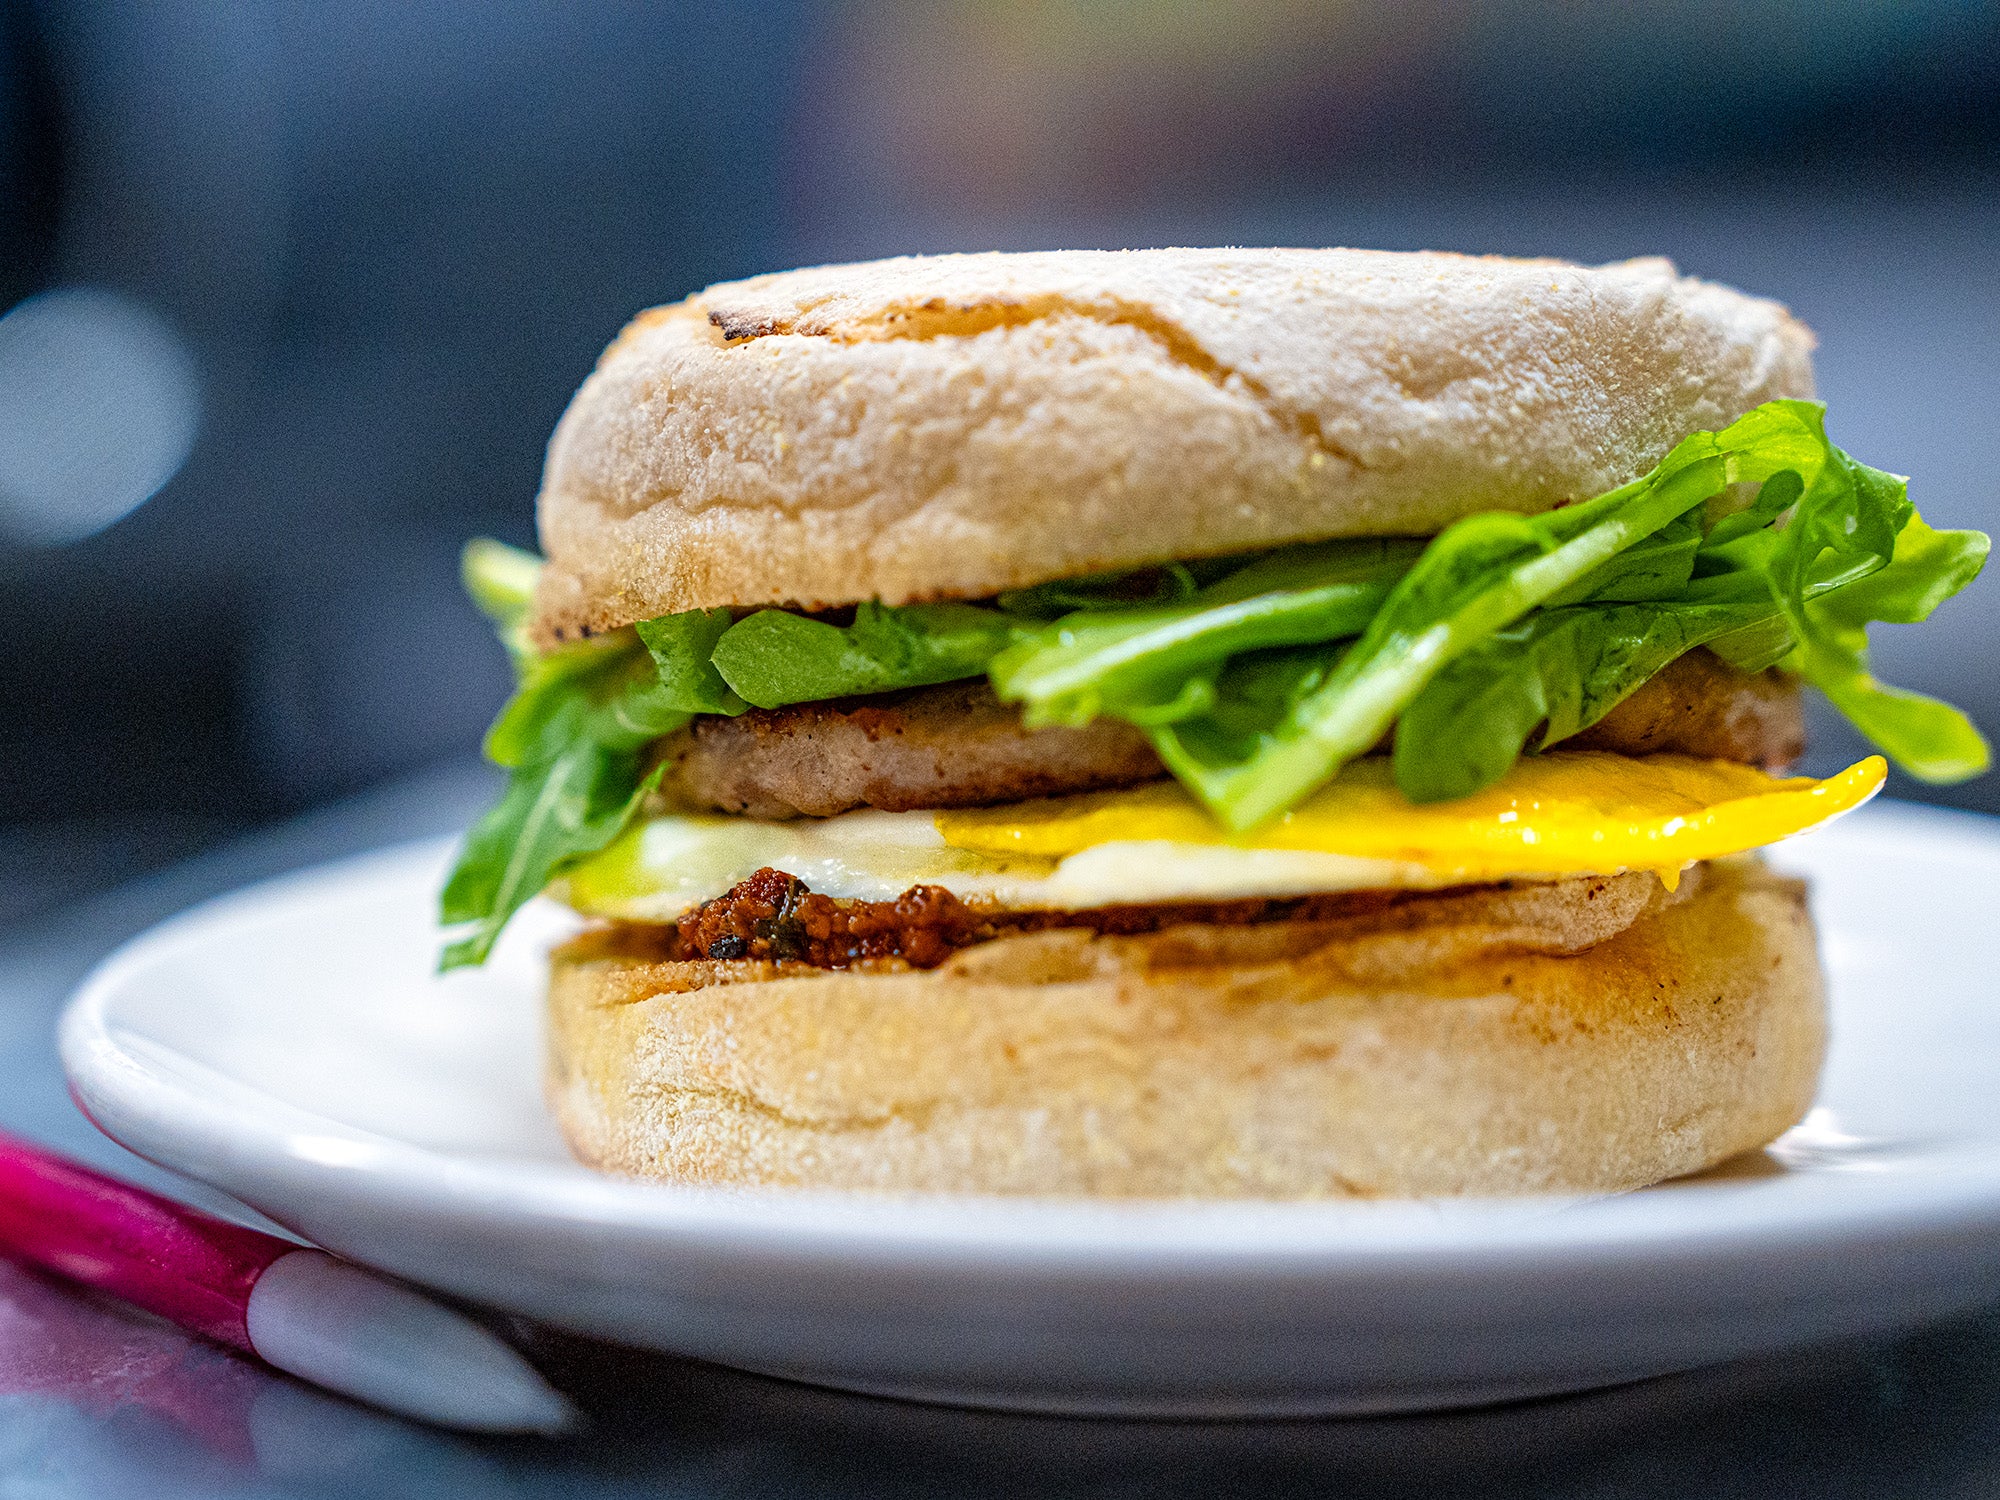 An English muffin breakfast sandwich with egg, pesto, arugual, and cheese